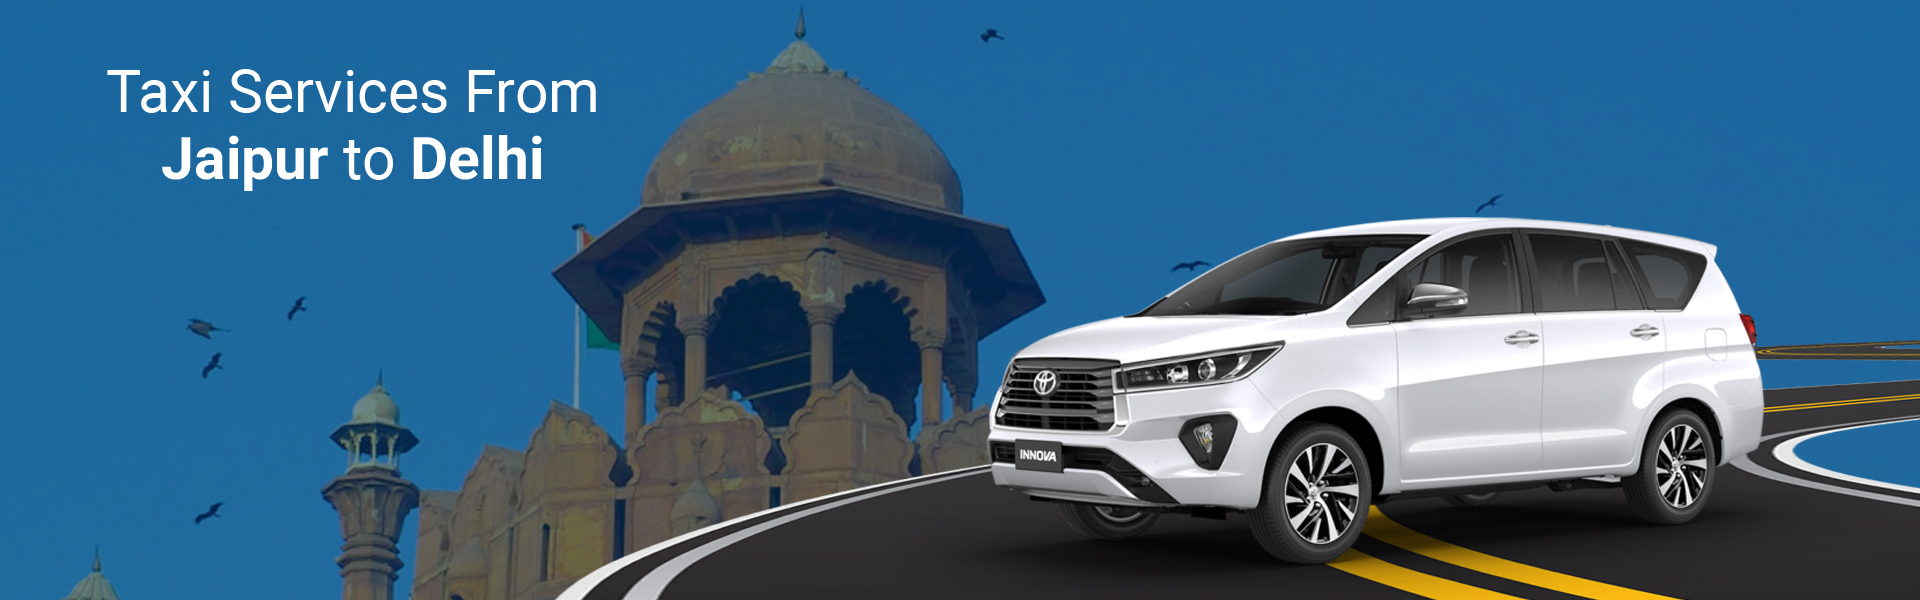 Taxi services from Jaipur to Delhi